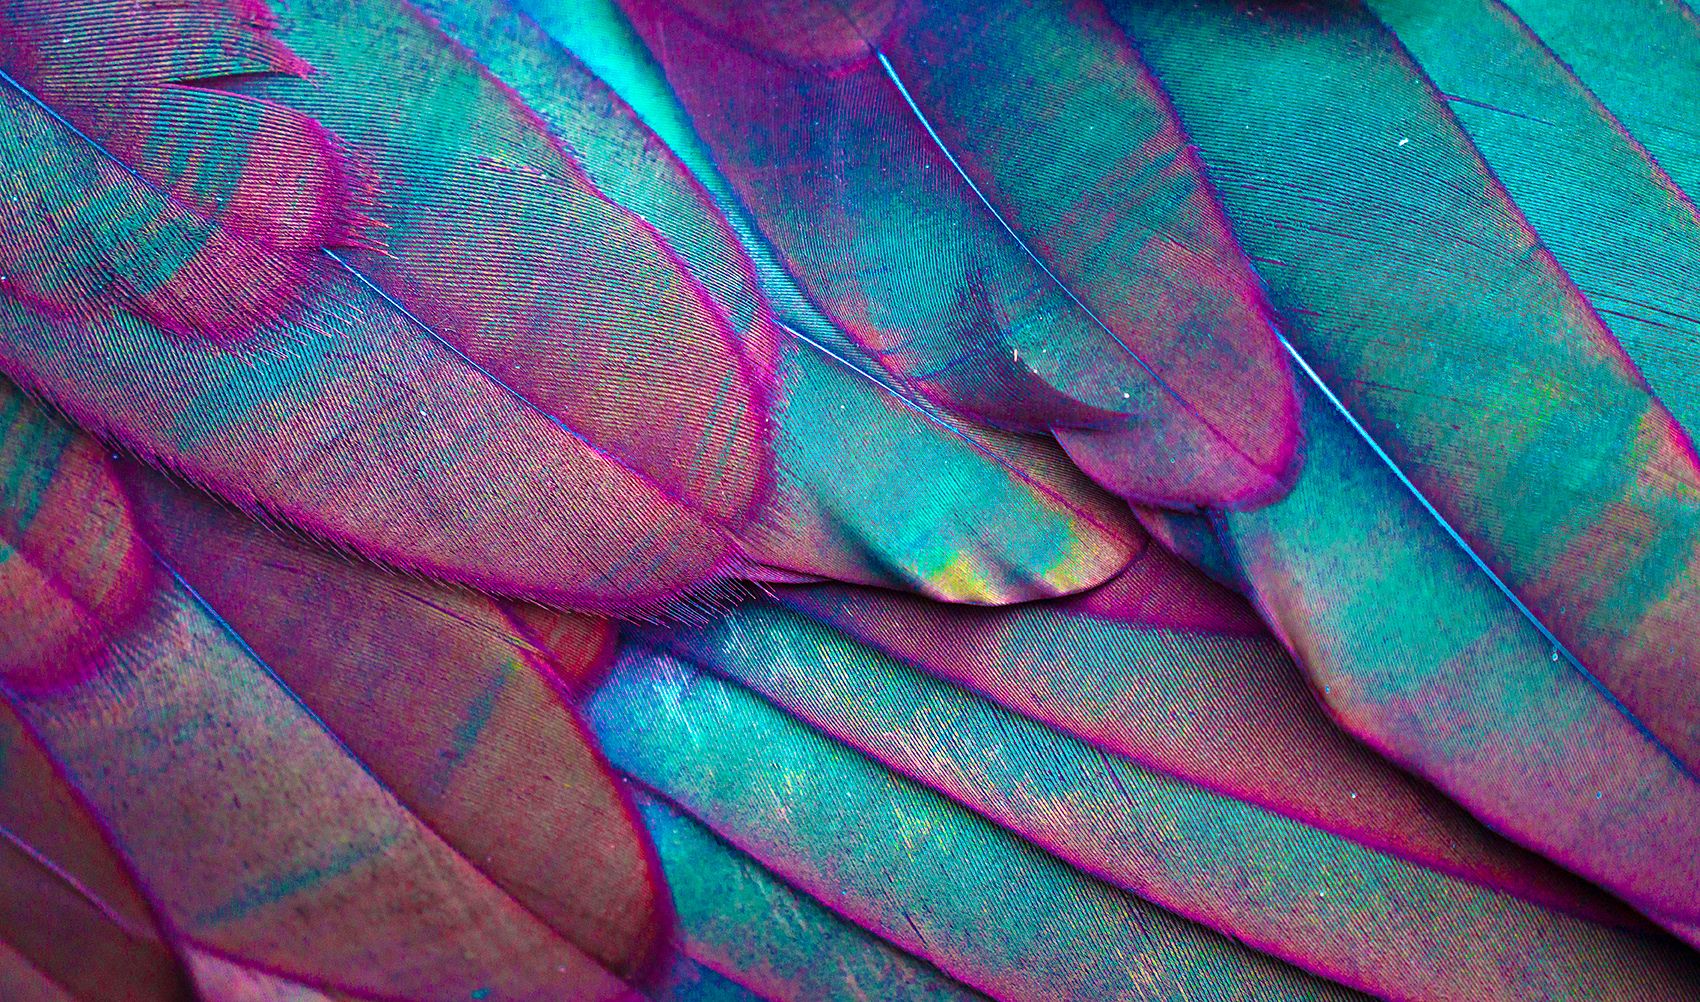 A close up of a bird's wing with a blue and purple iridescent sheen. - Feathers